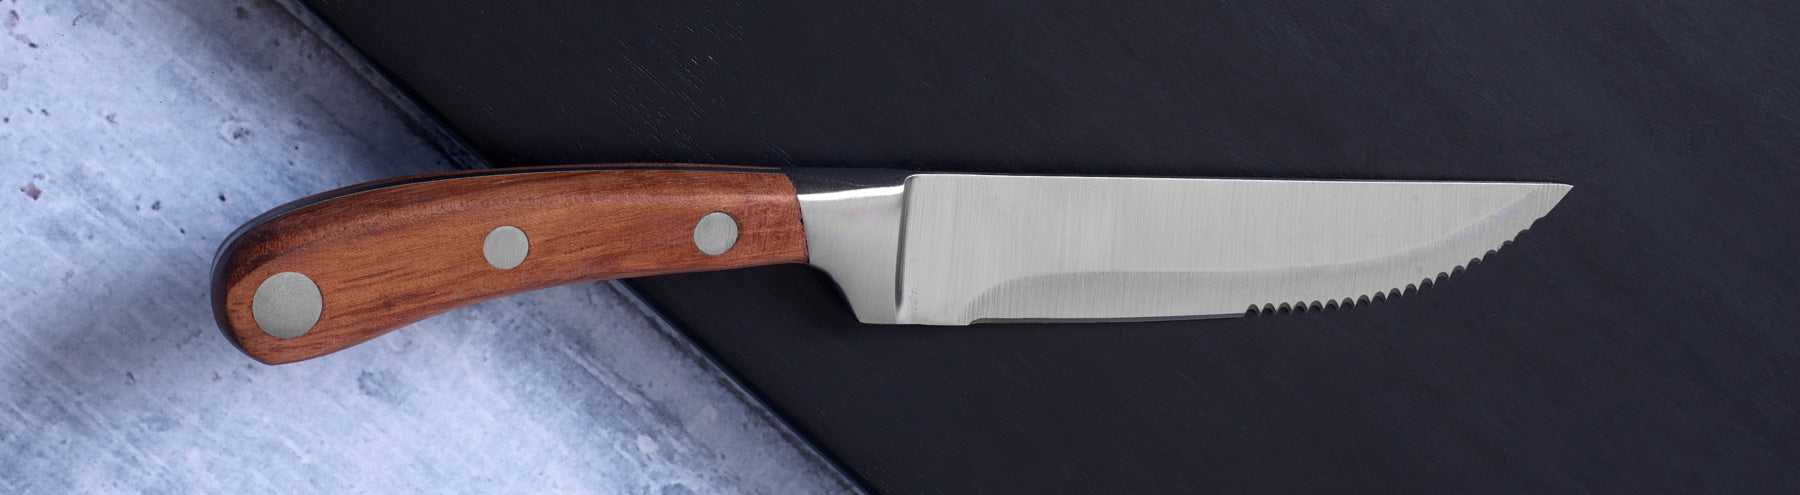 http://www.mikasahospitality.com/cdn/shop/collections/Collection-Steak-Knives.jpg?v=1683680912&width=2048